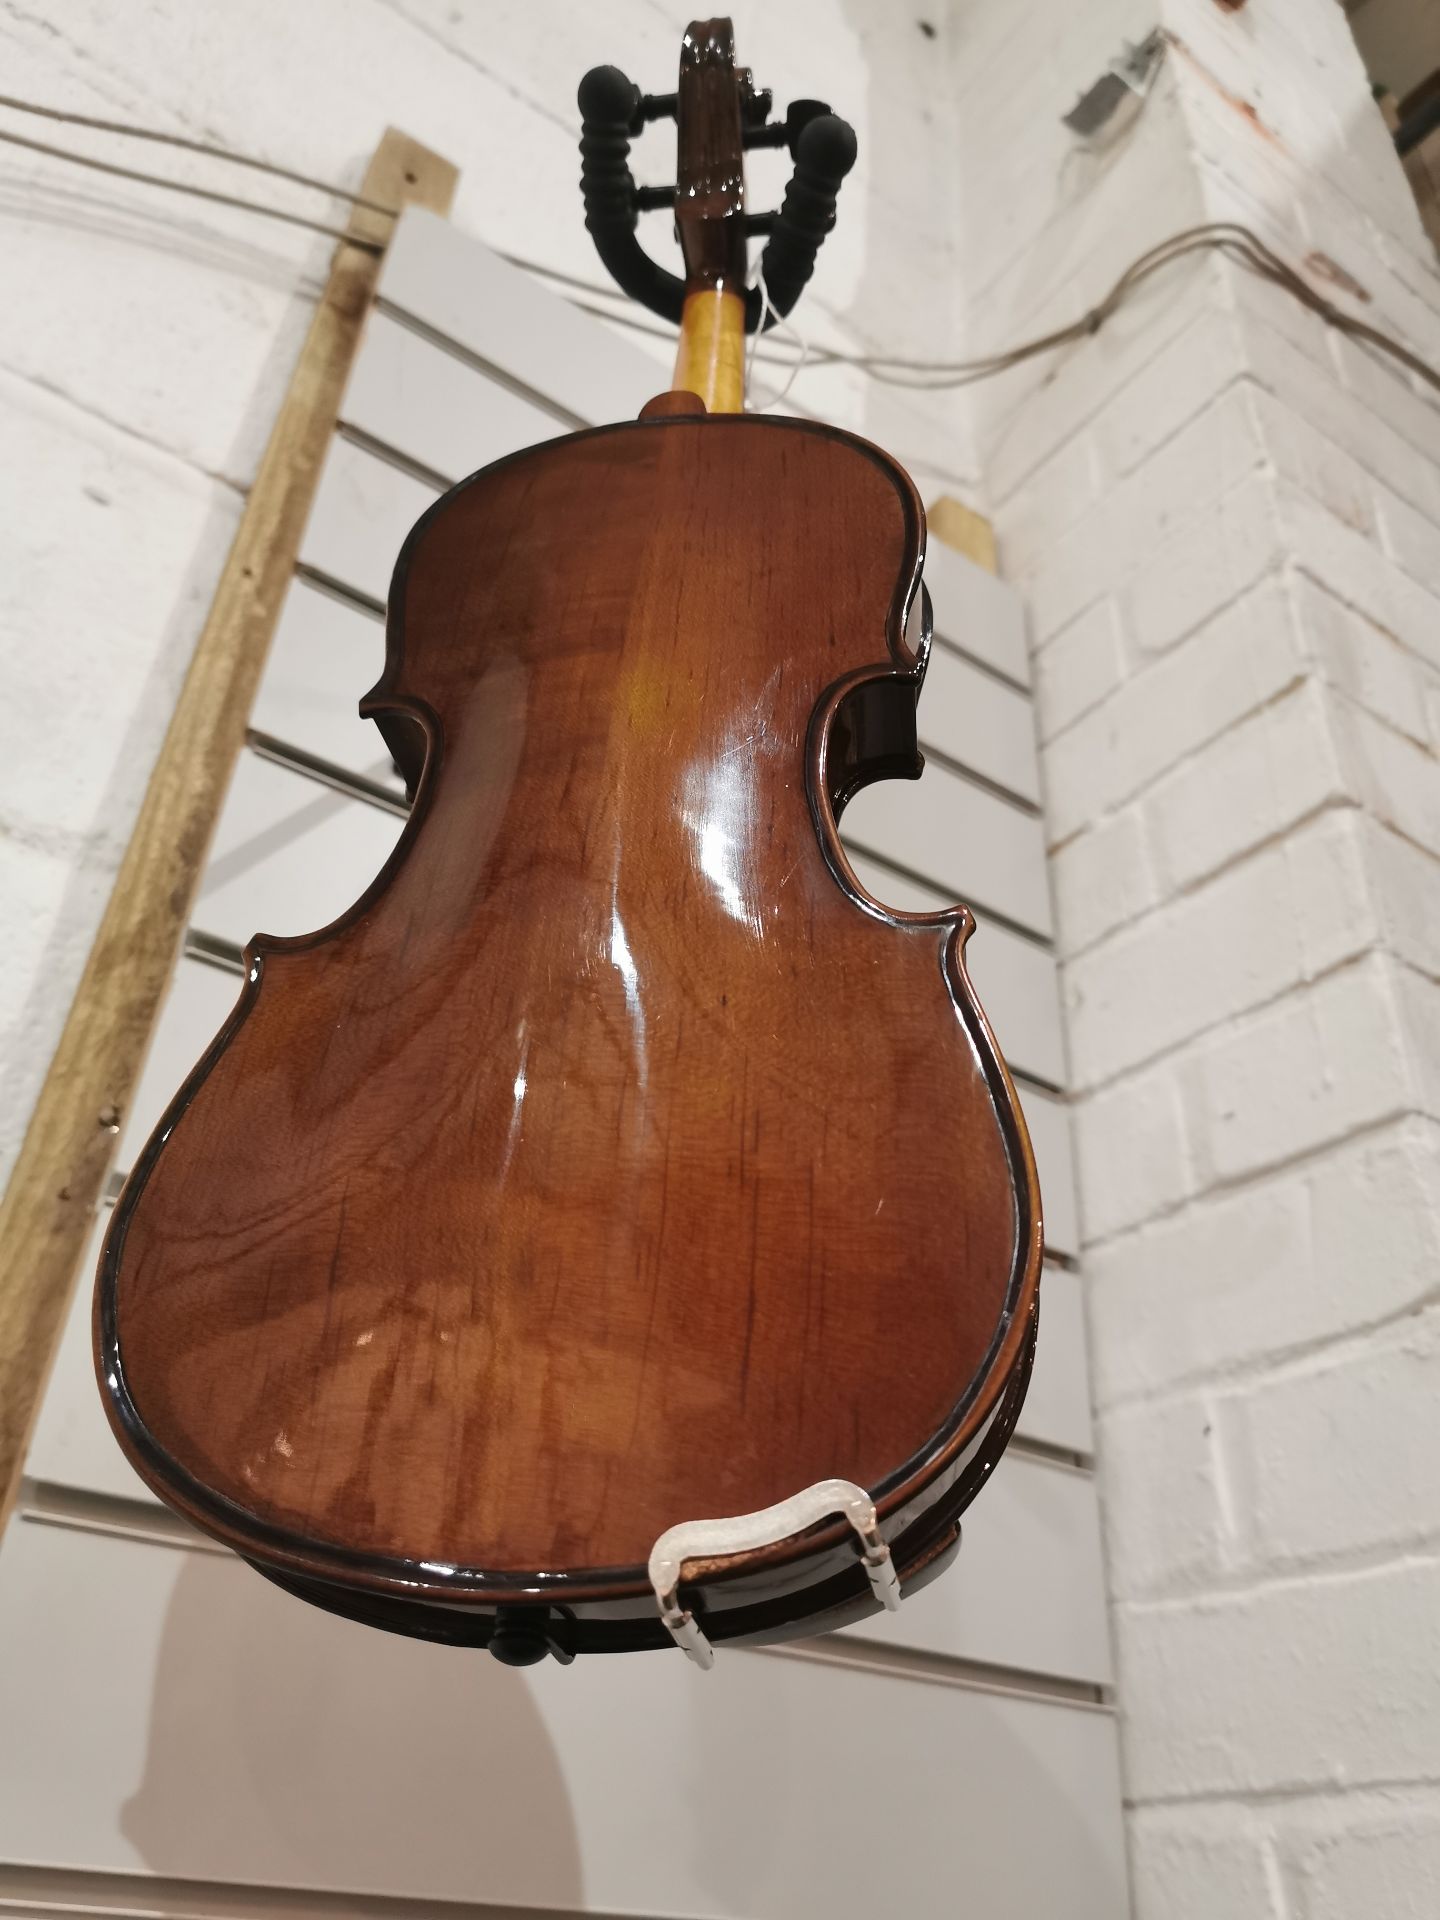 1/2 Violin Outfit with Hidersine Case & Bow - Image 8 of 12